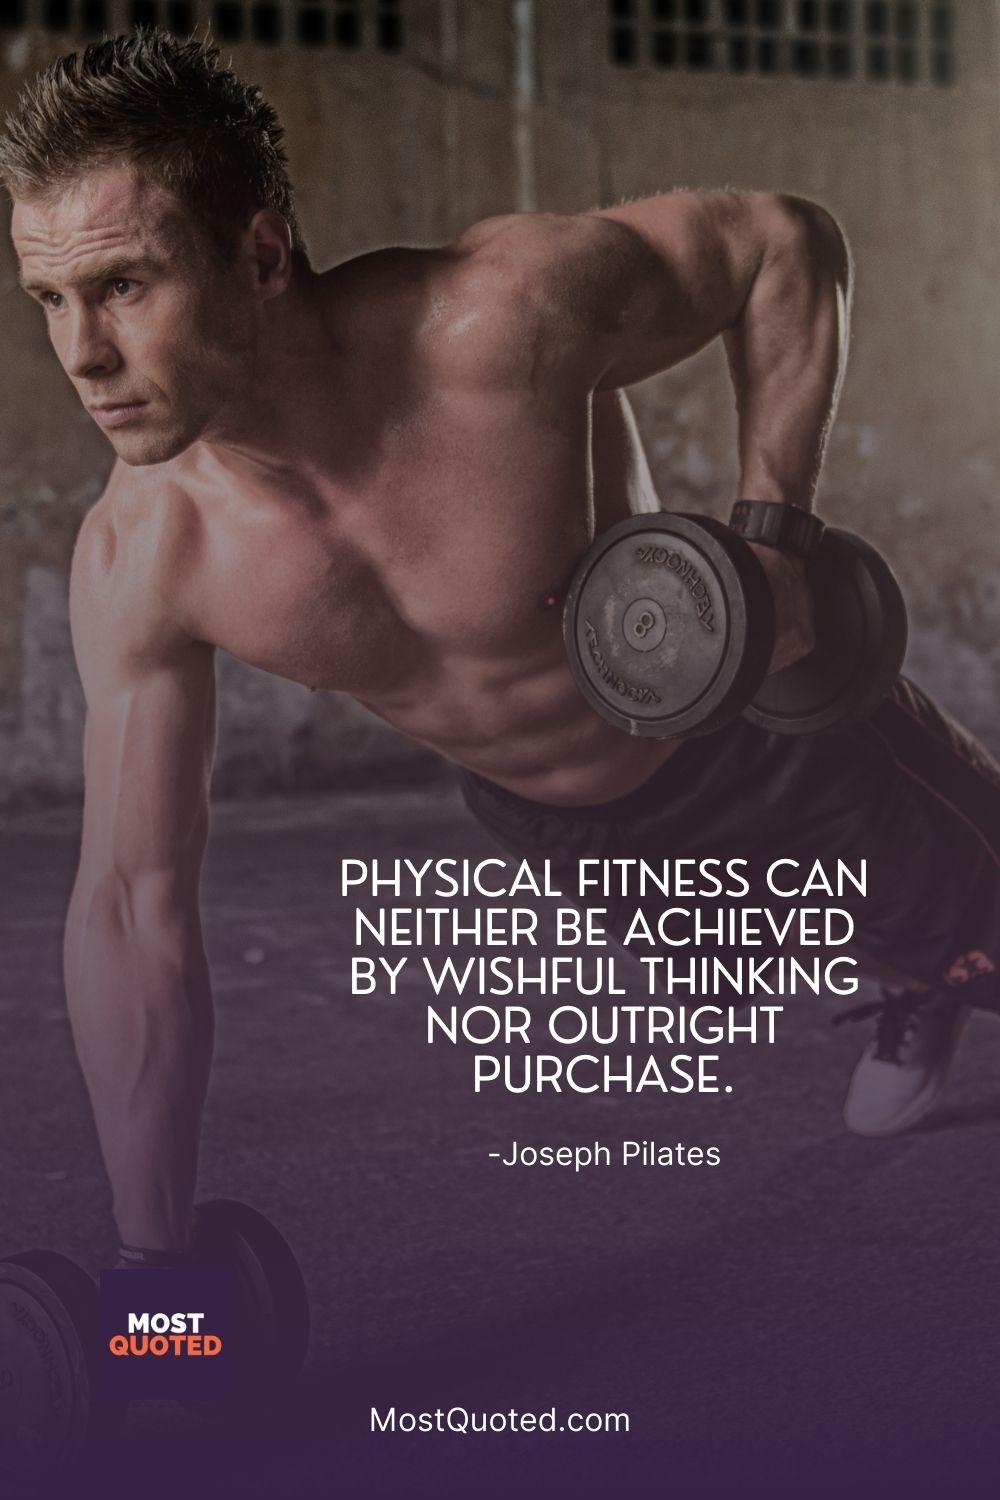 Physical fitness can neither be achieved by wishful thinking nor outright purchase.